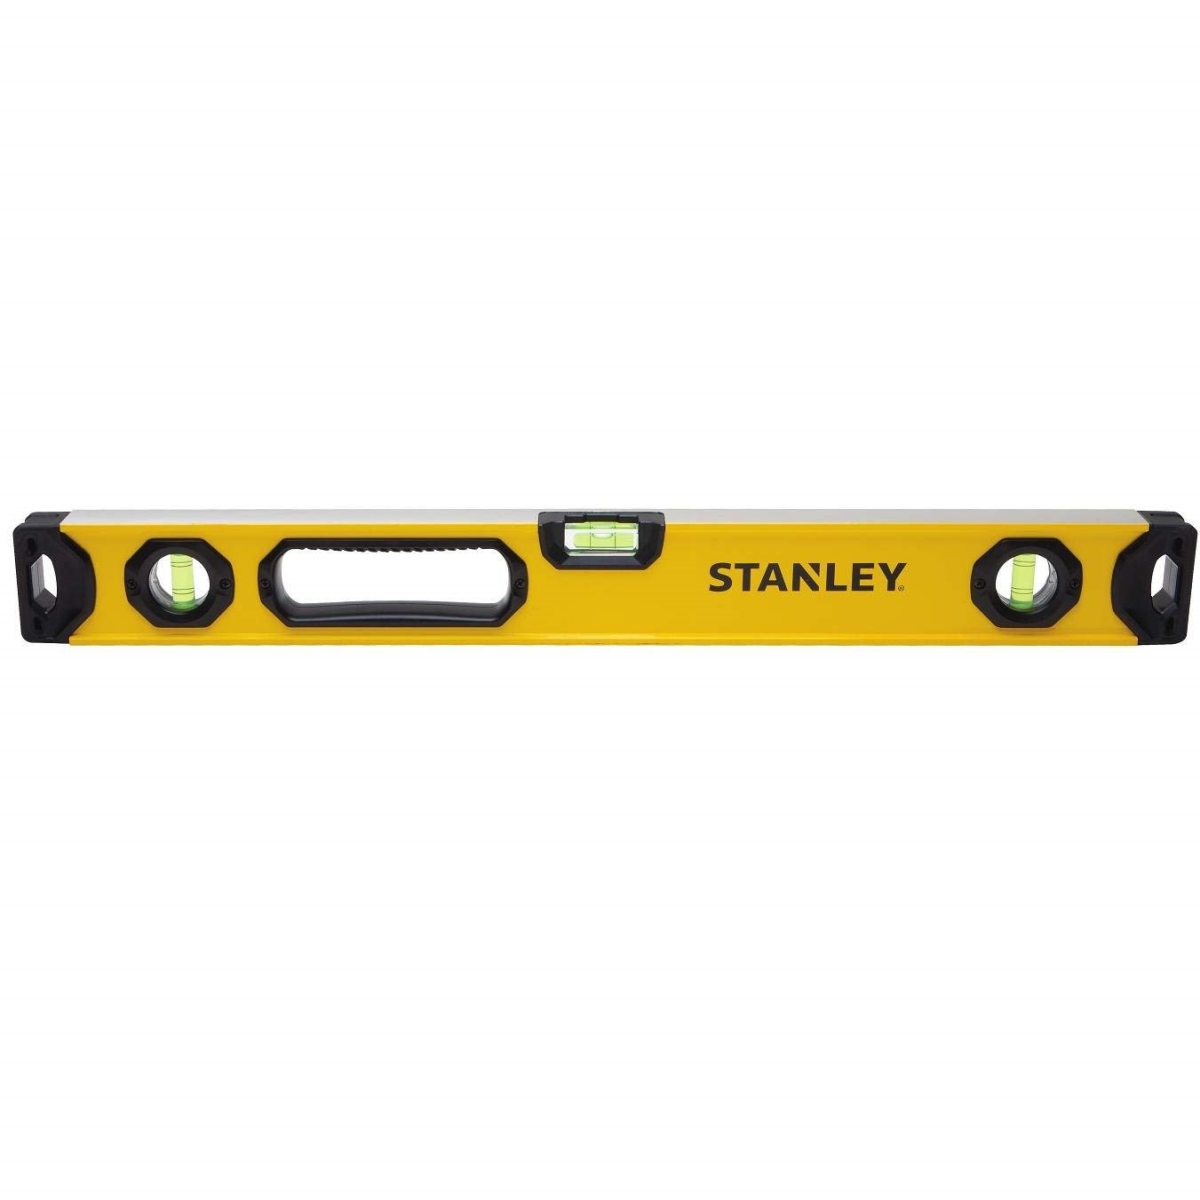 680-stht42496 24 In. Box Level, Non-magnetic - Yellow & Black